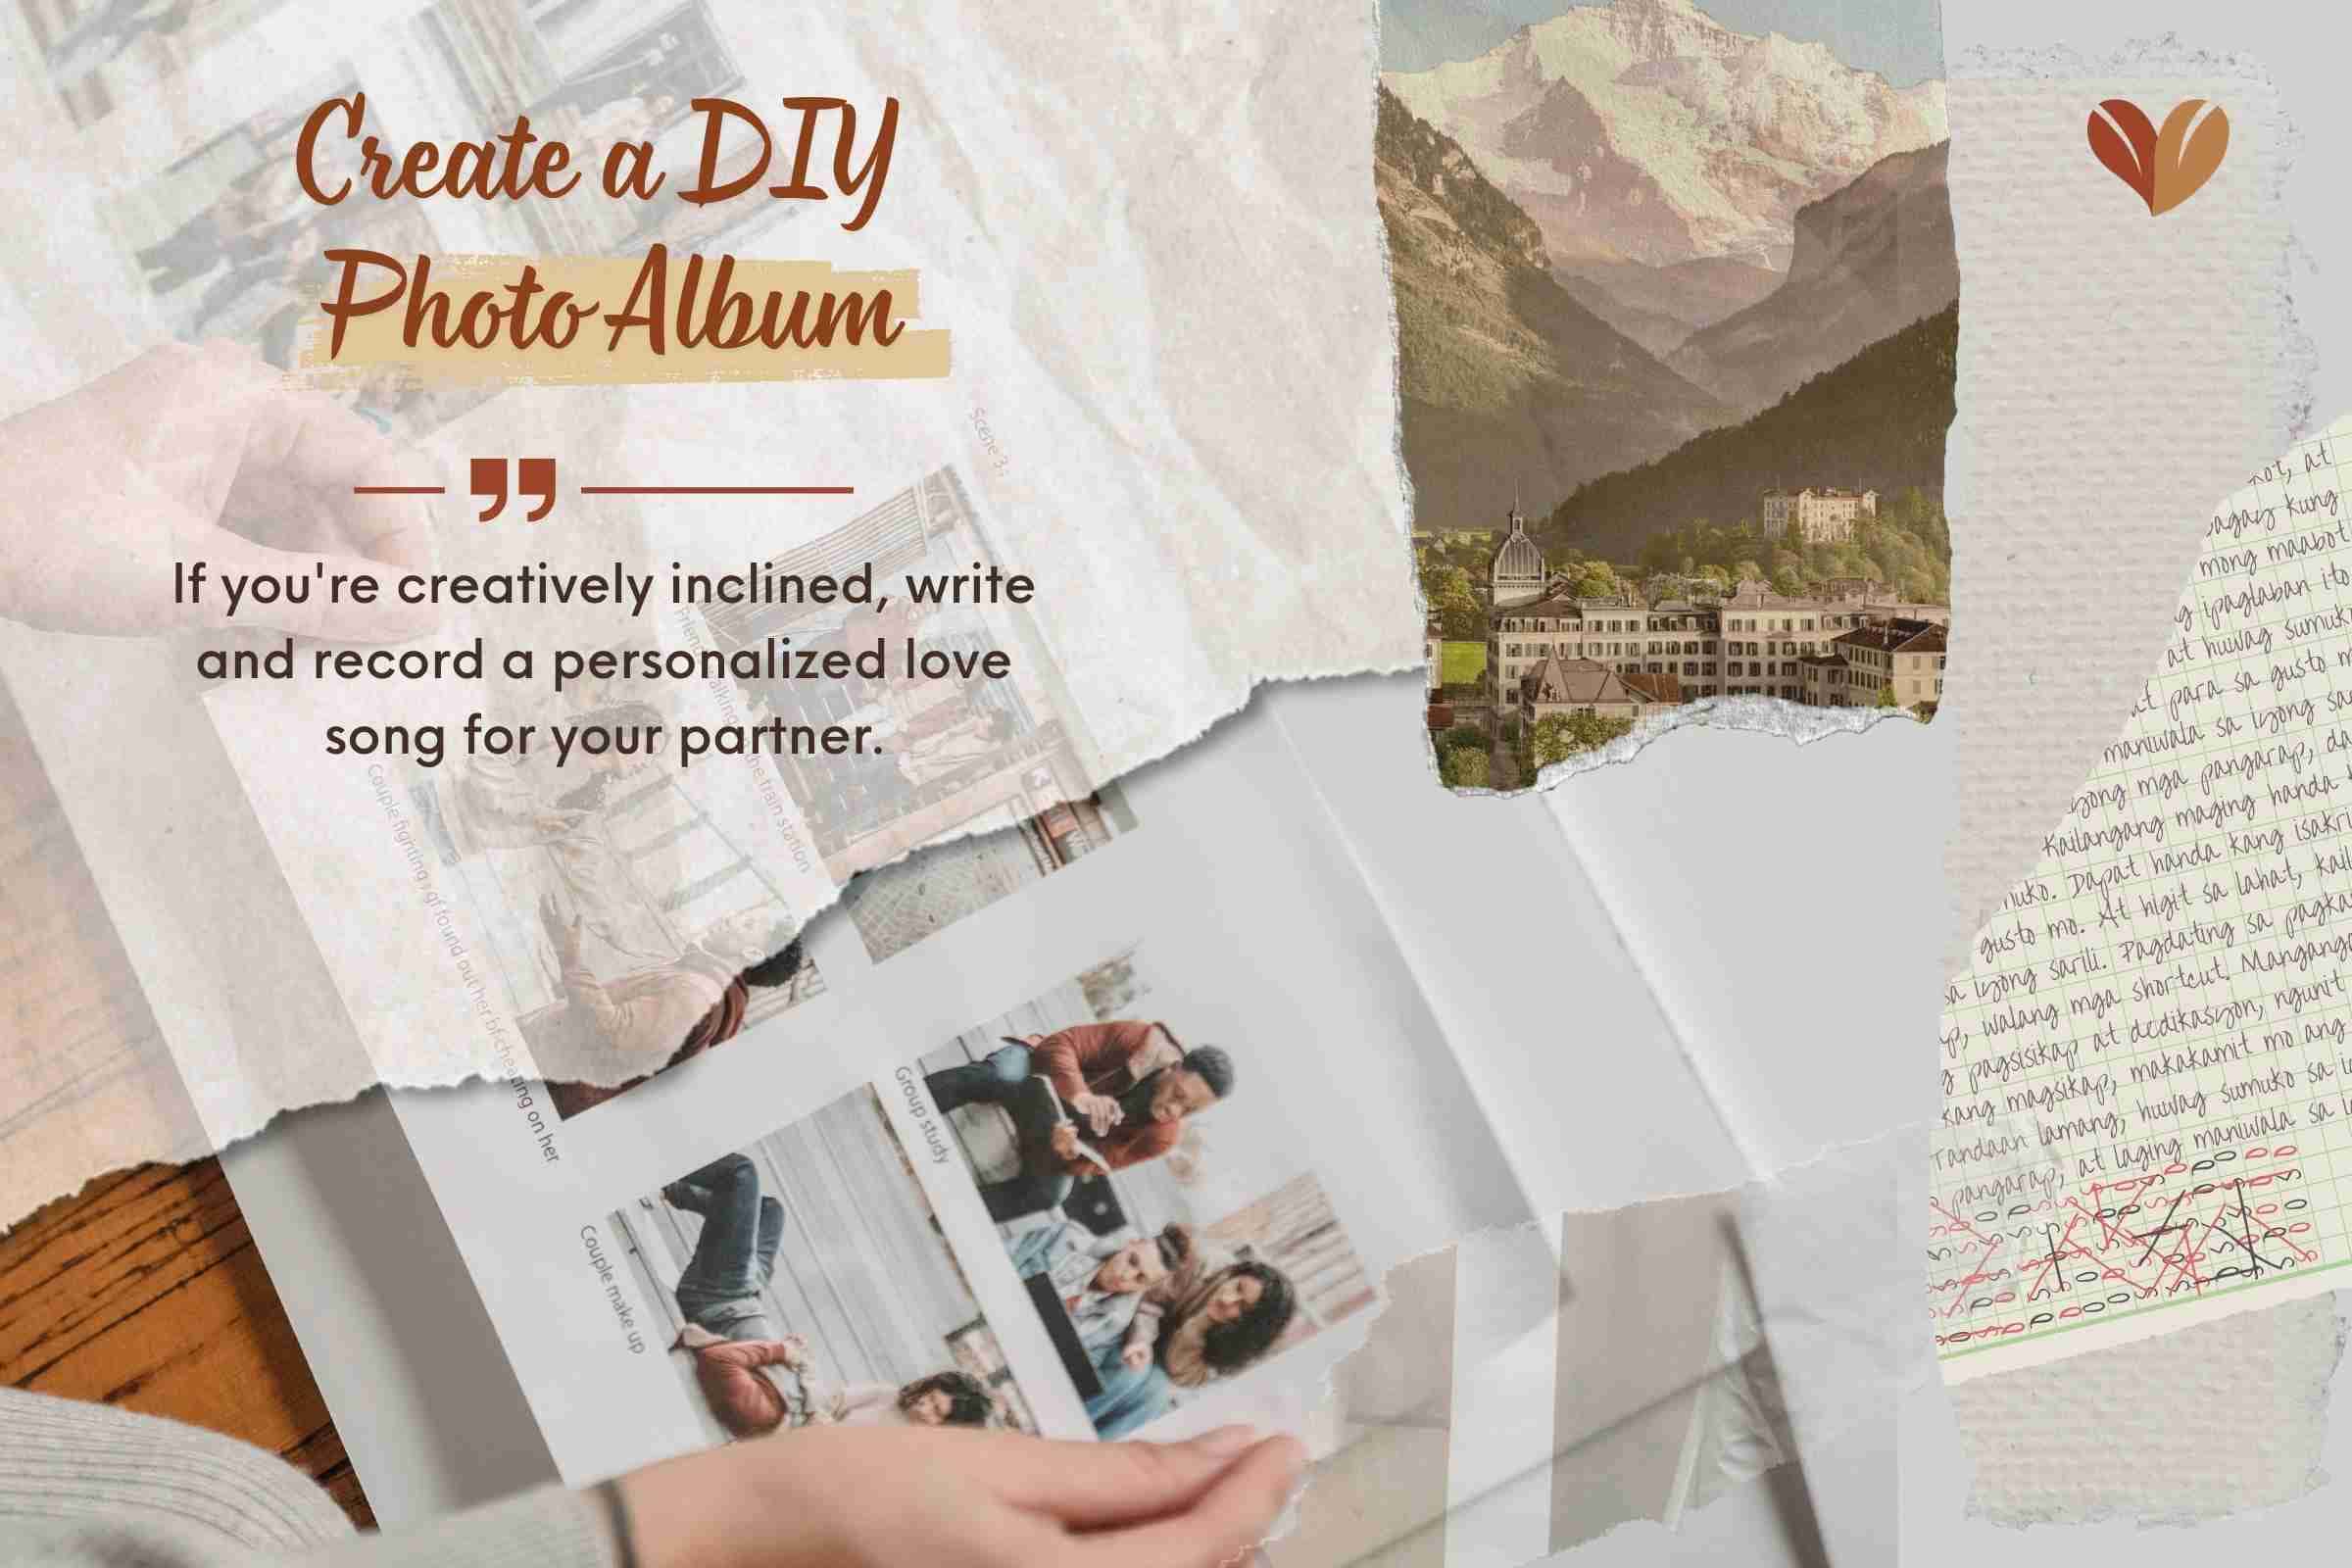 1st anniversary gifts for her can be a DIY photo album